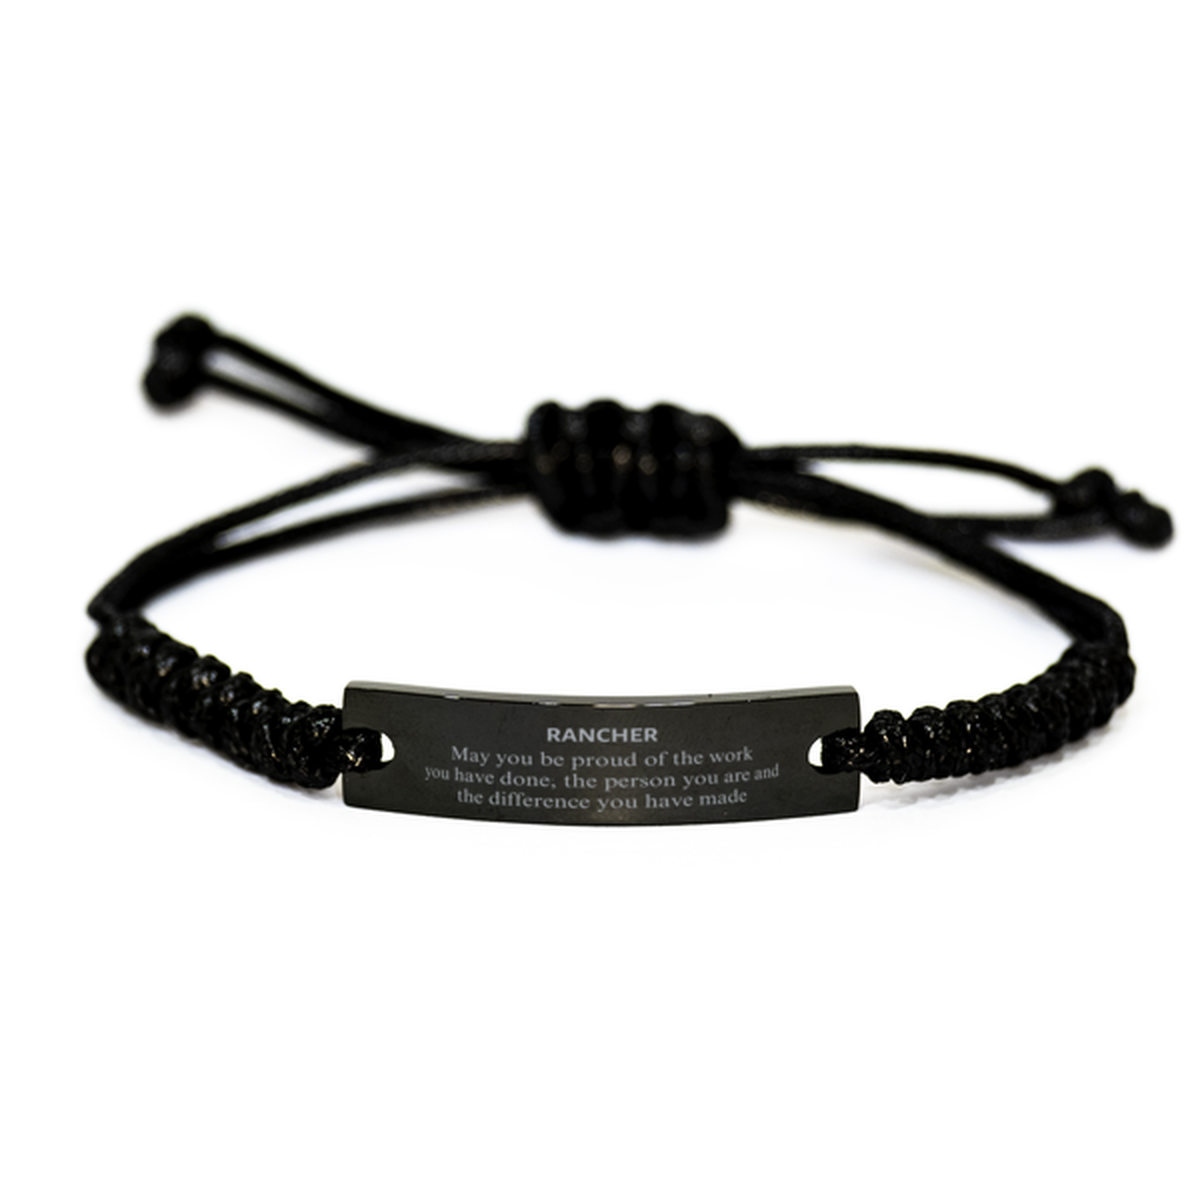 Rancher May you be proud of the work you have done, Retirement Rancher Black Rope Bracelet for Colleague Appreciation Gifts Amazing for Rancher